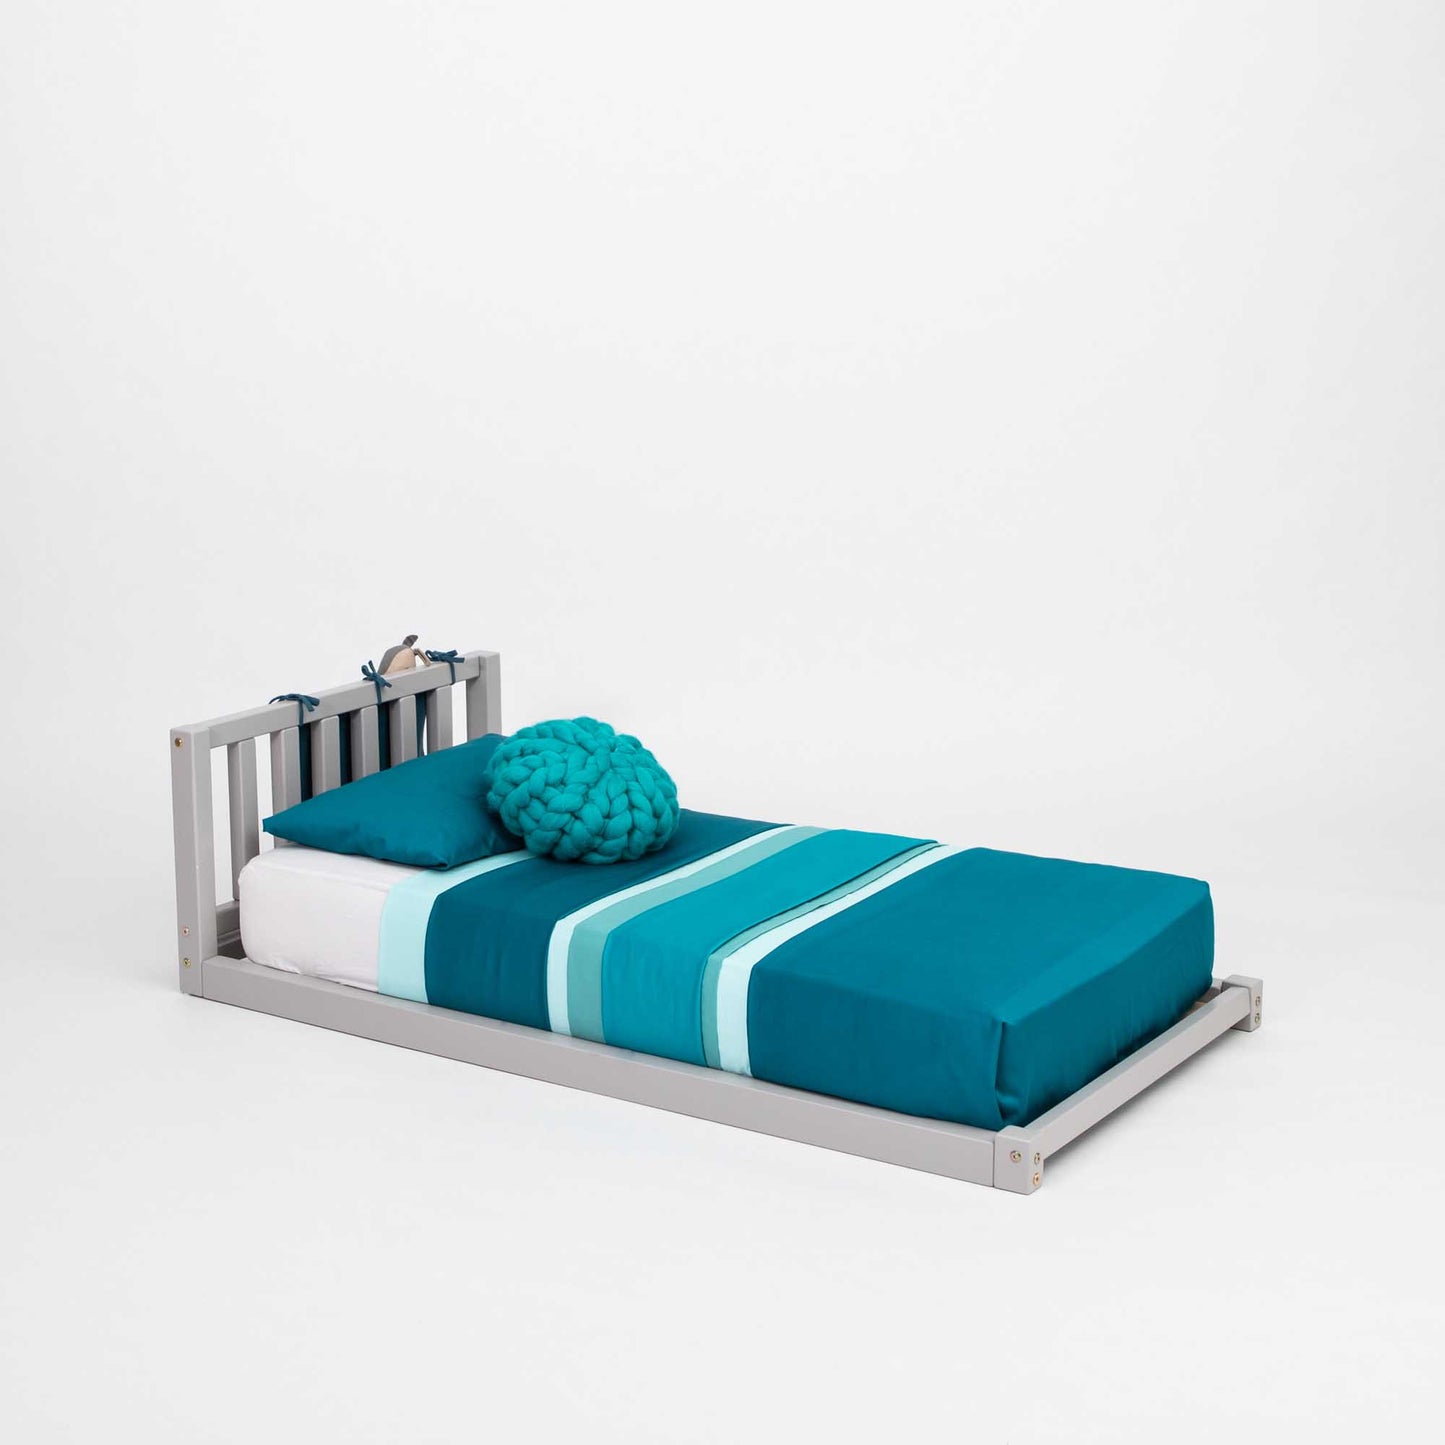 A Montessori-inspired toddler bed with blue and teal bedding.